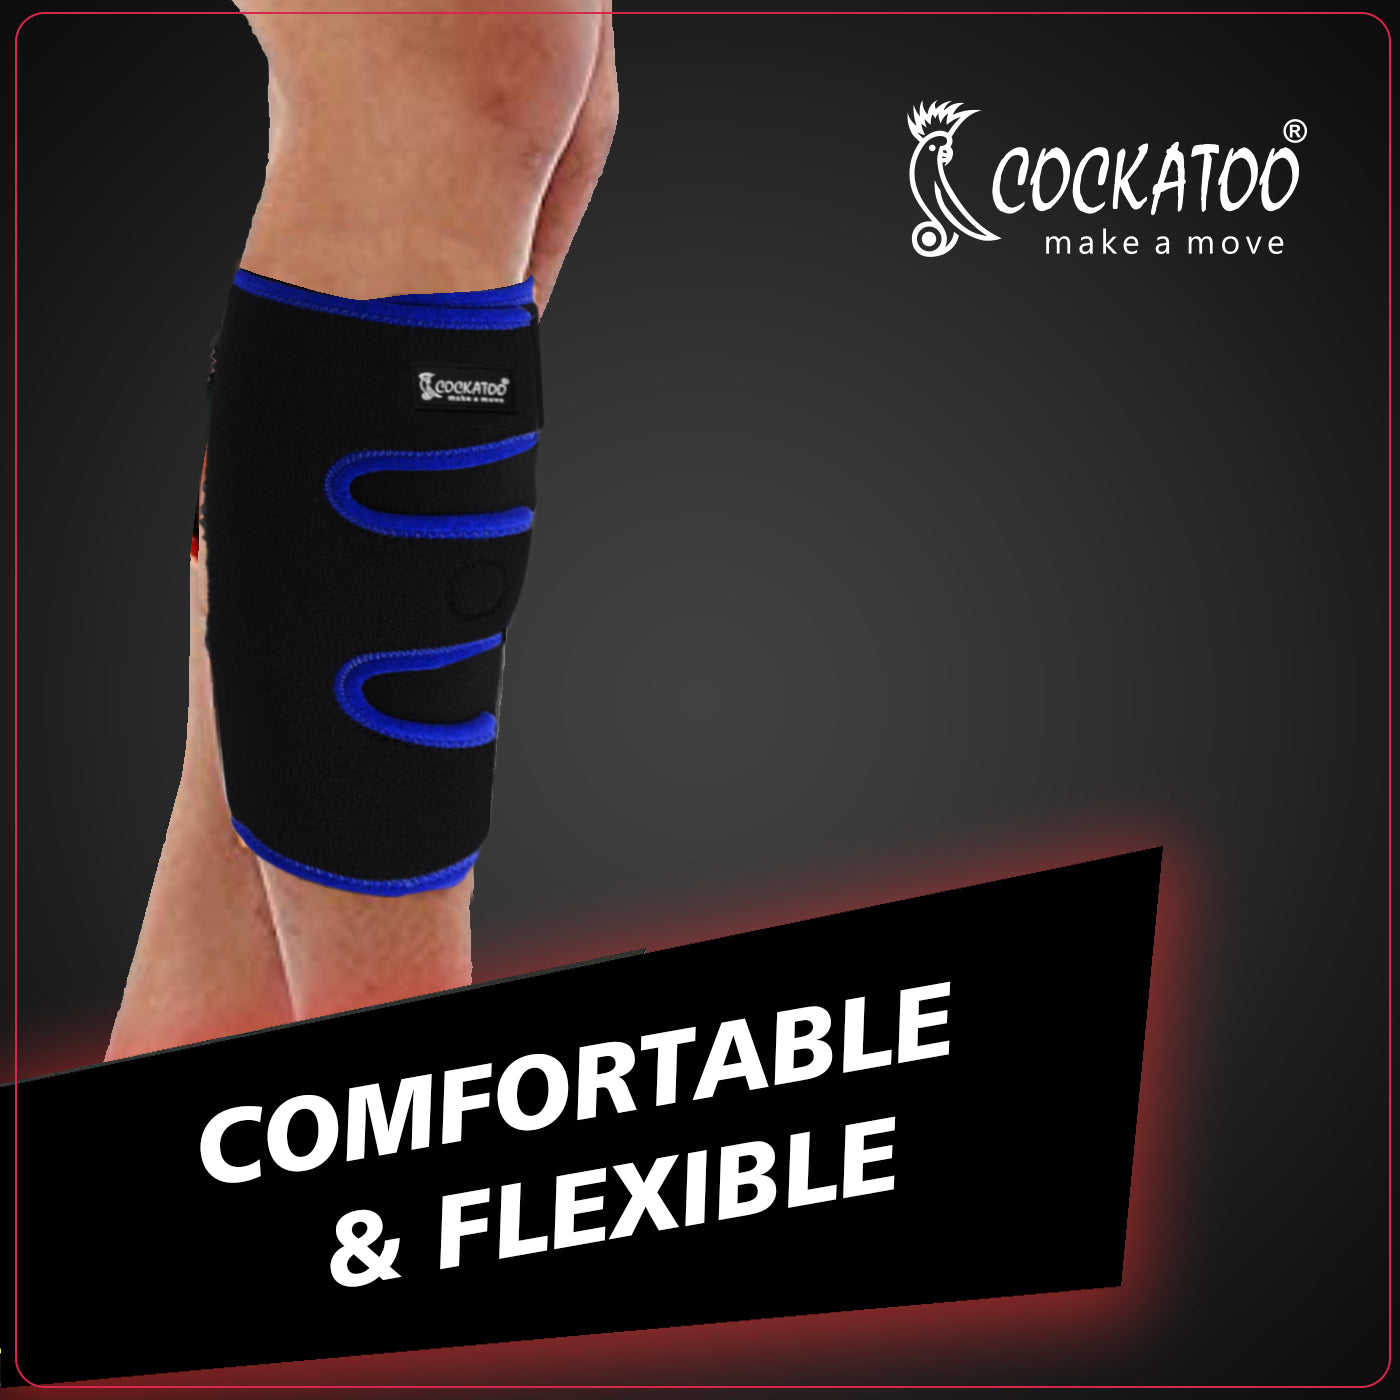 Full Leg Compression Sleeve | Copper-Infused Recovery Wrap for Calf, Thigh,  Knee & Shin Pain Relief